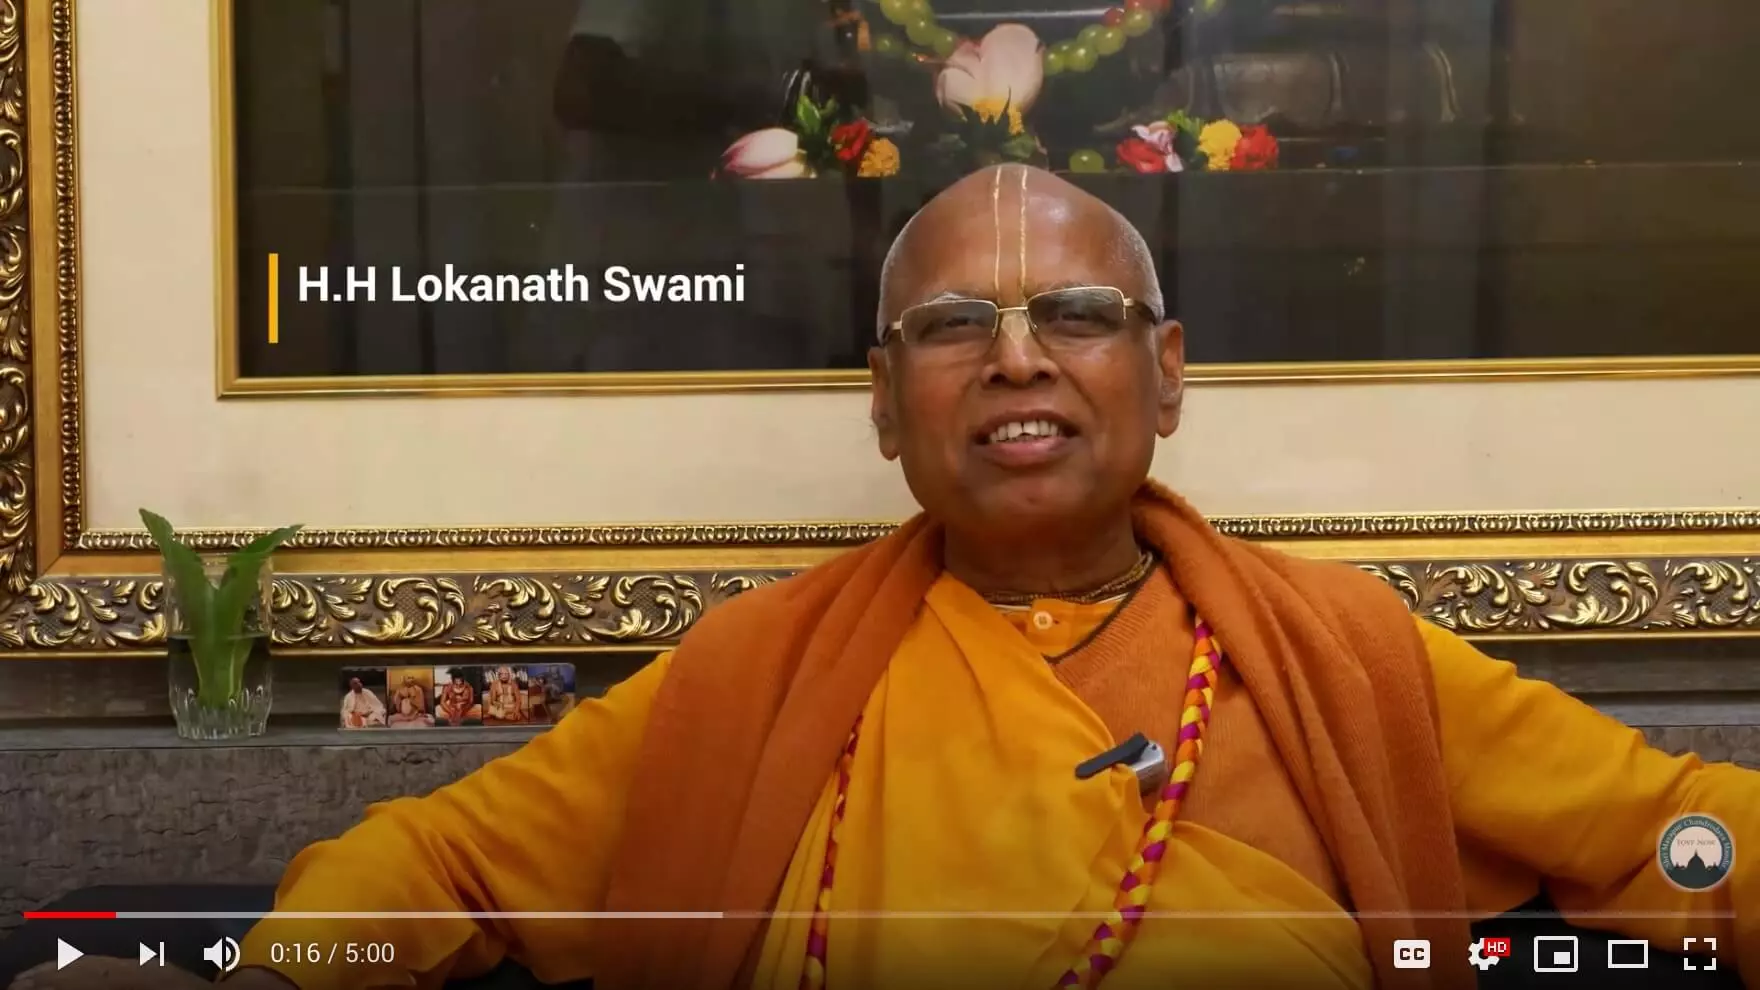 H.H. Lokanath Swami Speaks About the #GivingTOVP 10 Day Matching ...